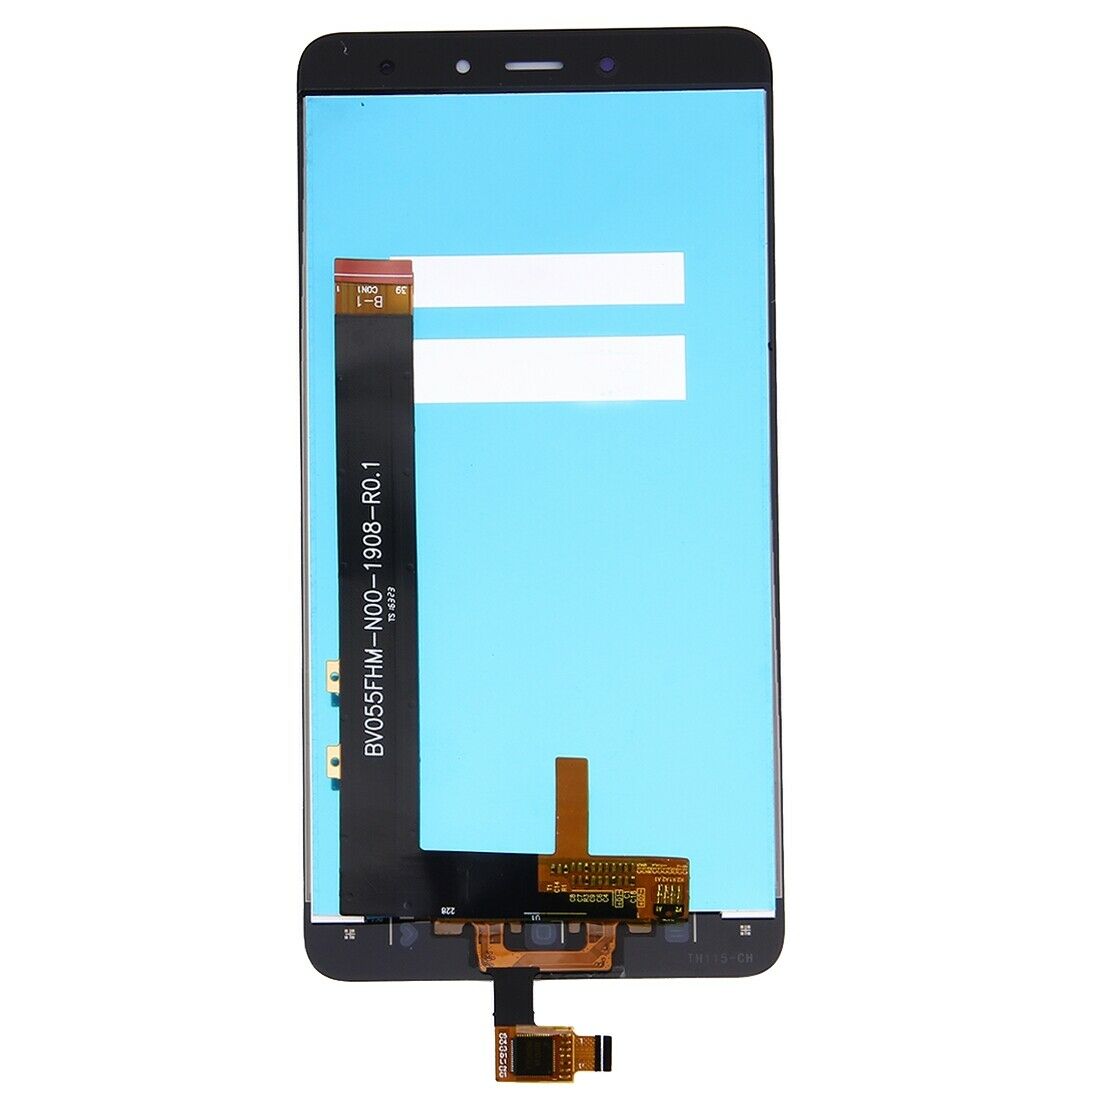 Xiaomi Redmi Note 4 LCD Display Touch Screen Assembly Black for [product_price] - First Help Tech